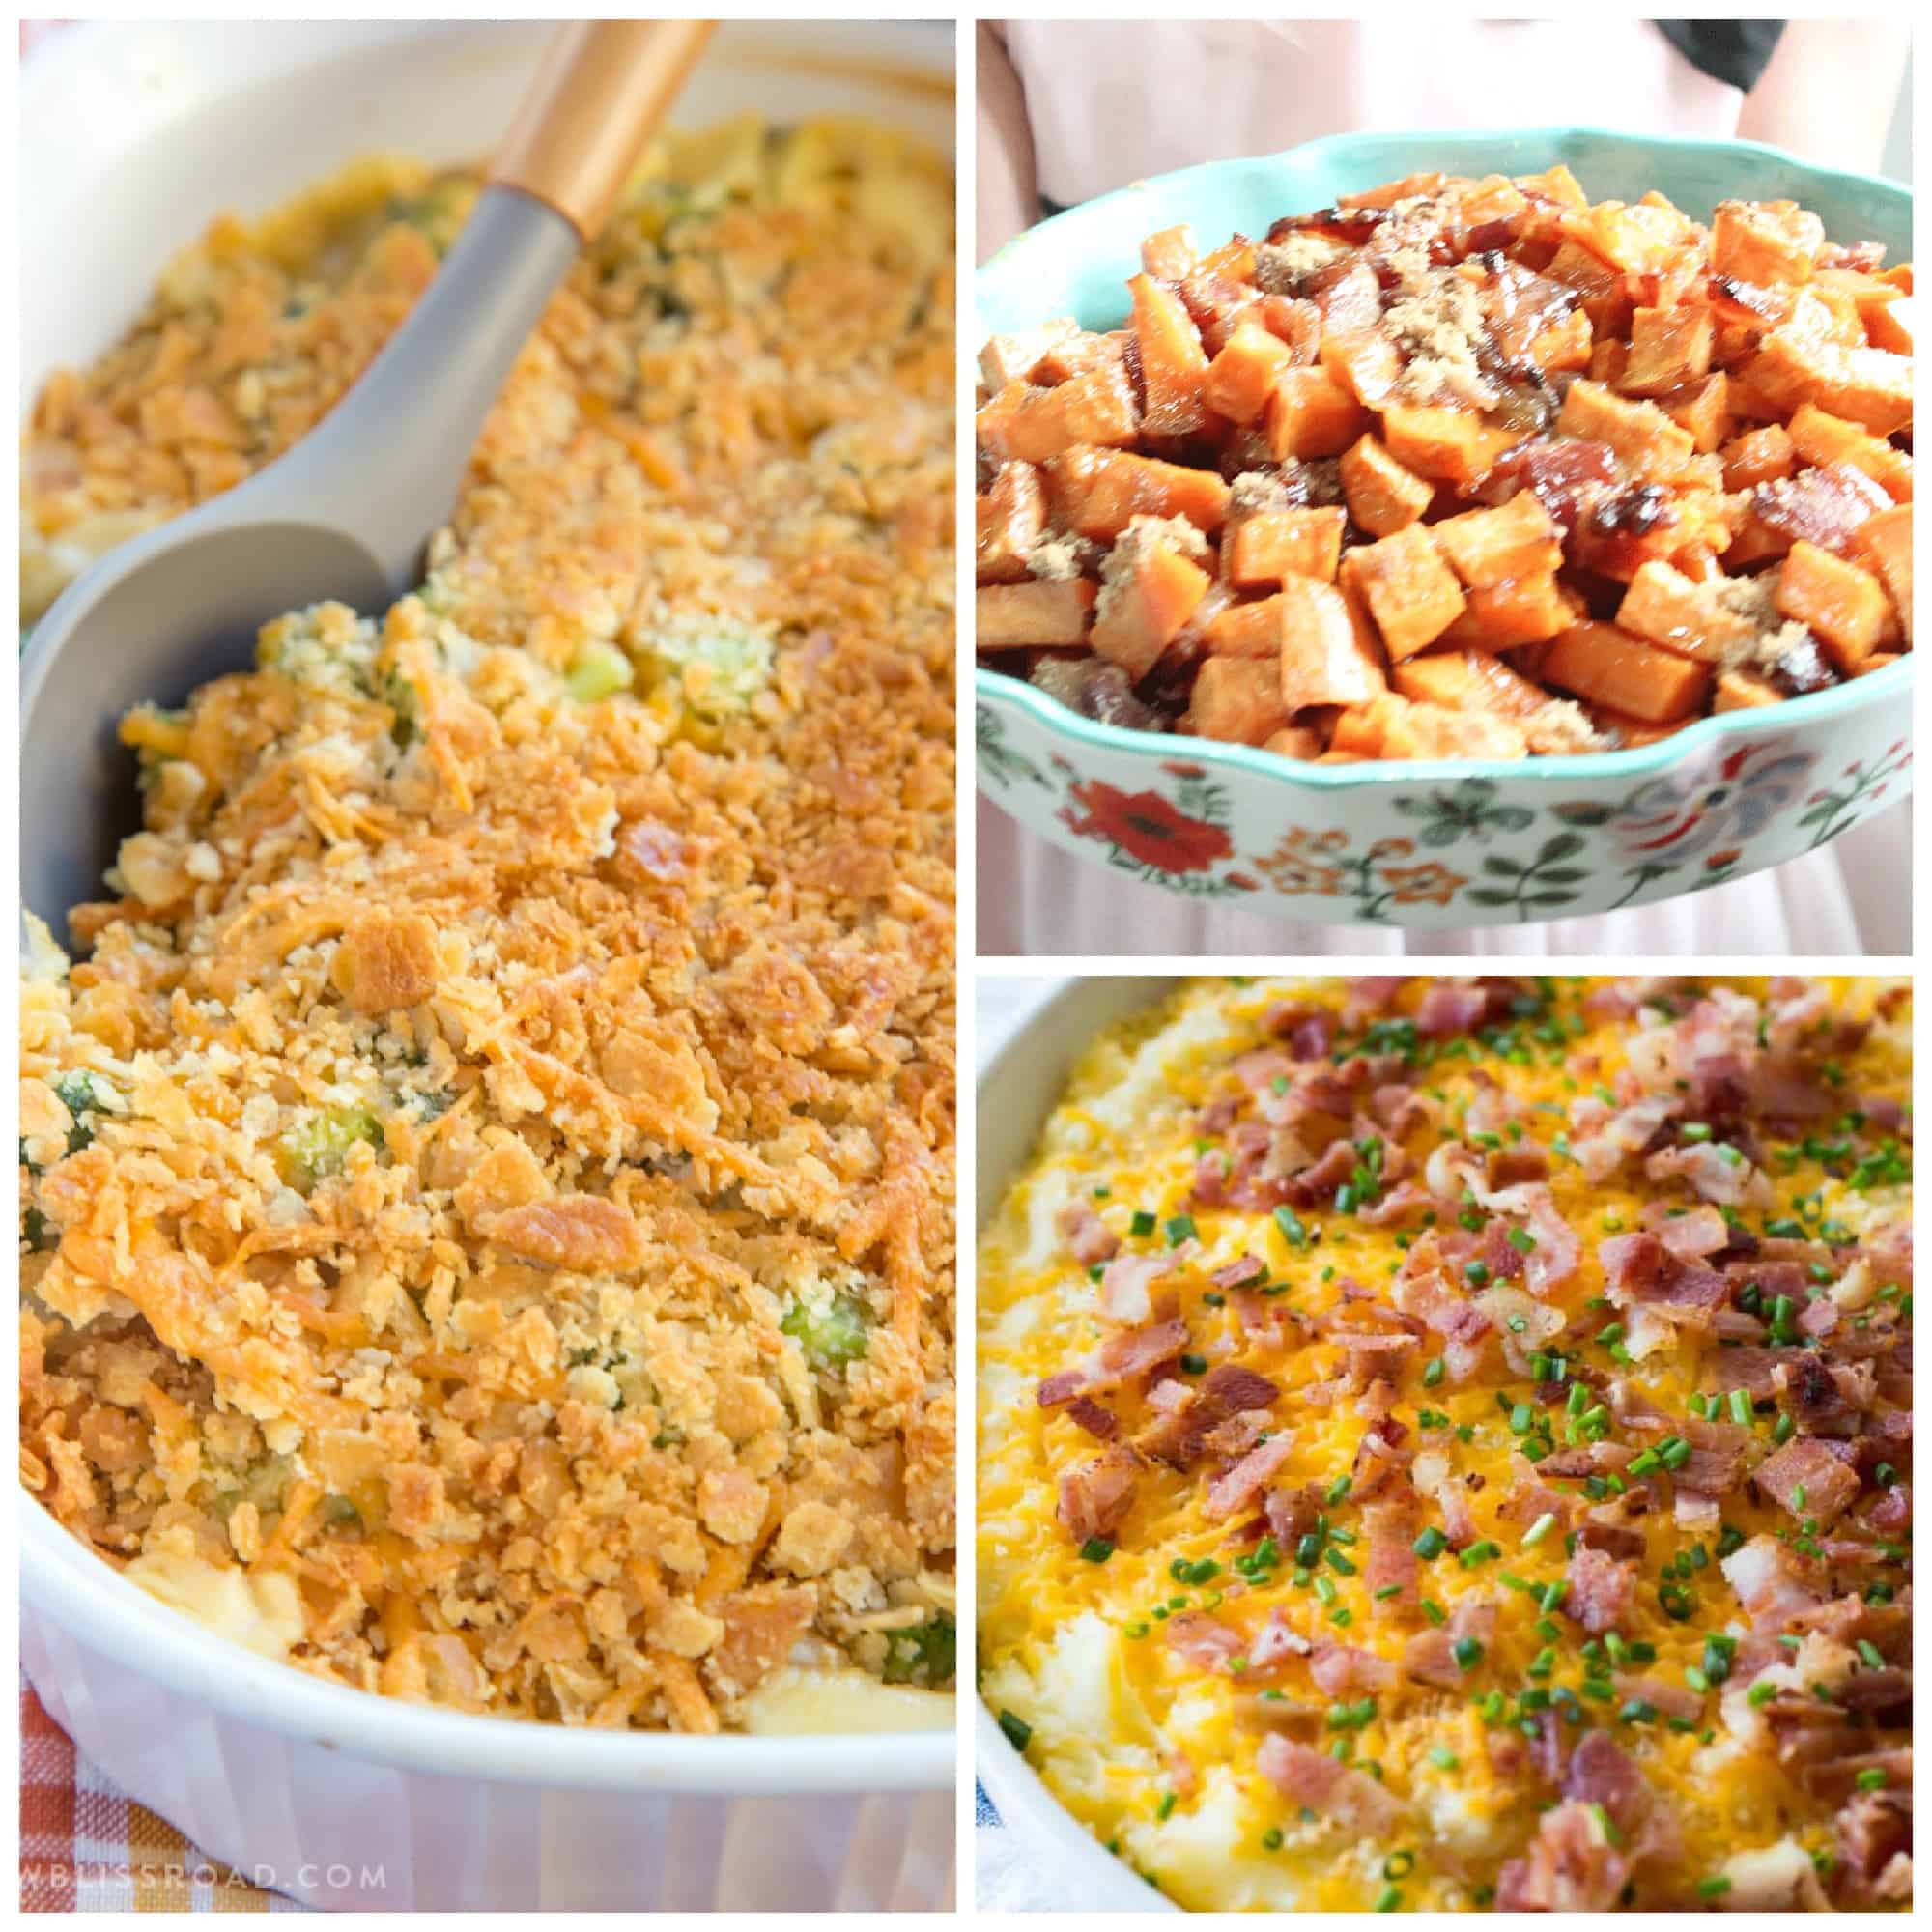 Thanksgiving Side Dishes Pinterest
 14 Mouth Watering Thanksgiving Side Dishes to Try This Year